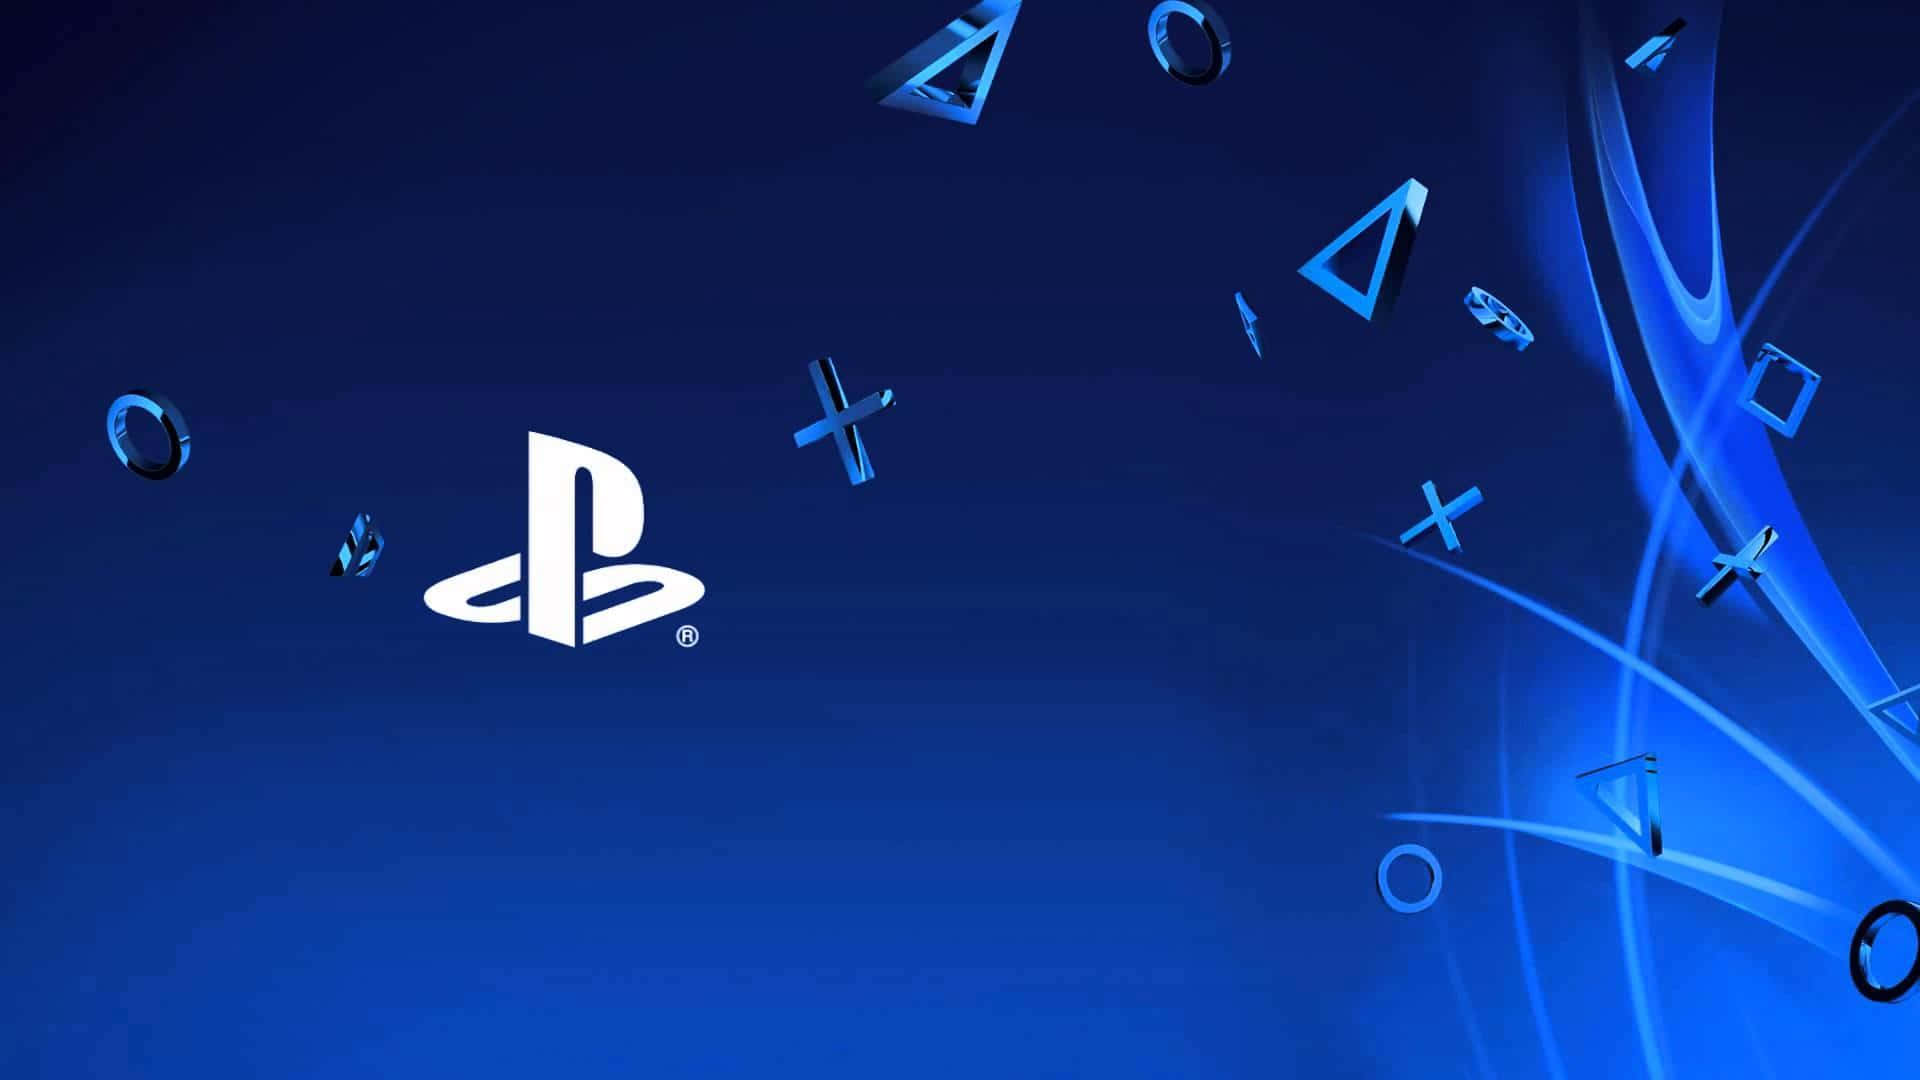 Add flair to your game console with the PS4 Theme. Wallpaper